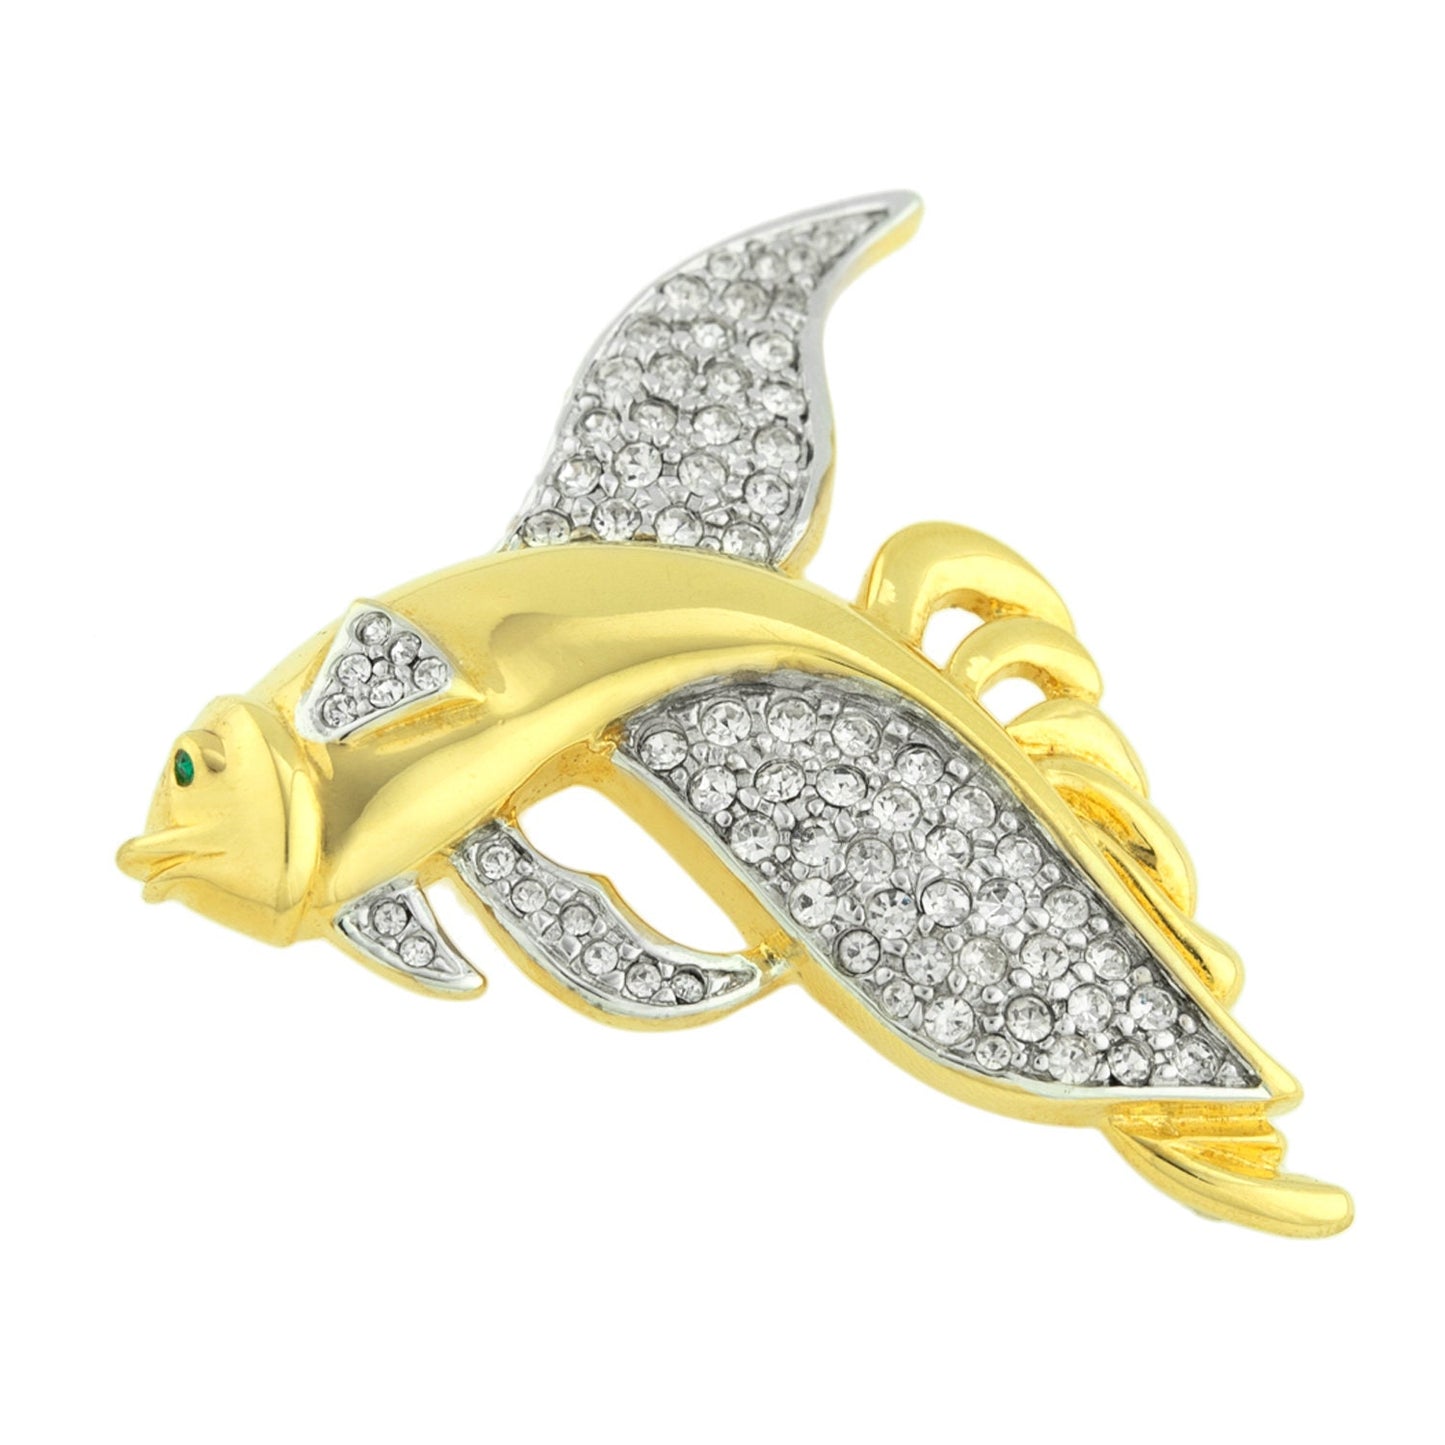 Vintage Ring Fish Brooch Pin Clear Swarovski Crystals 18k Gold - Limited Stock - Never Worn